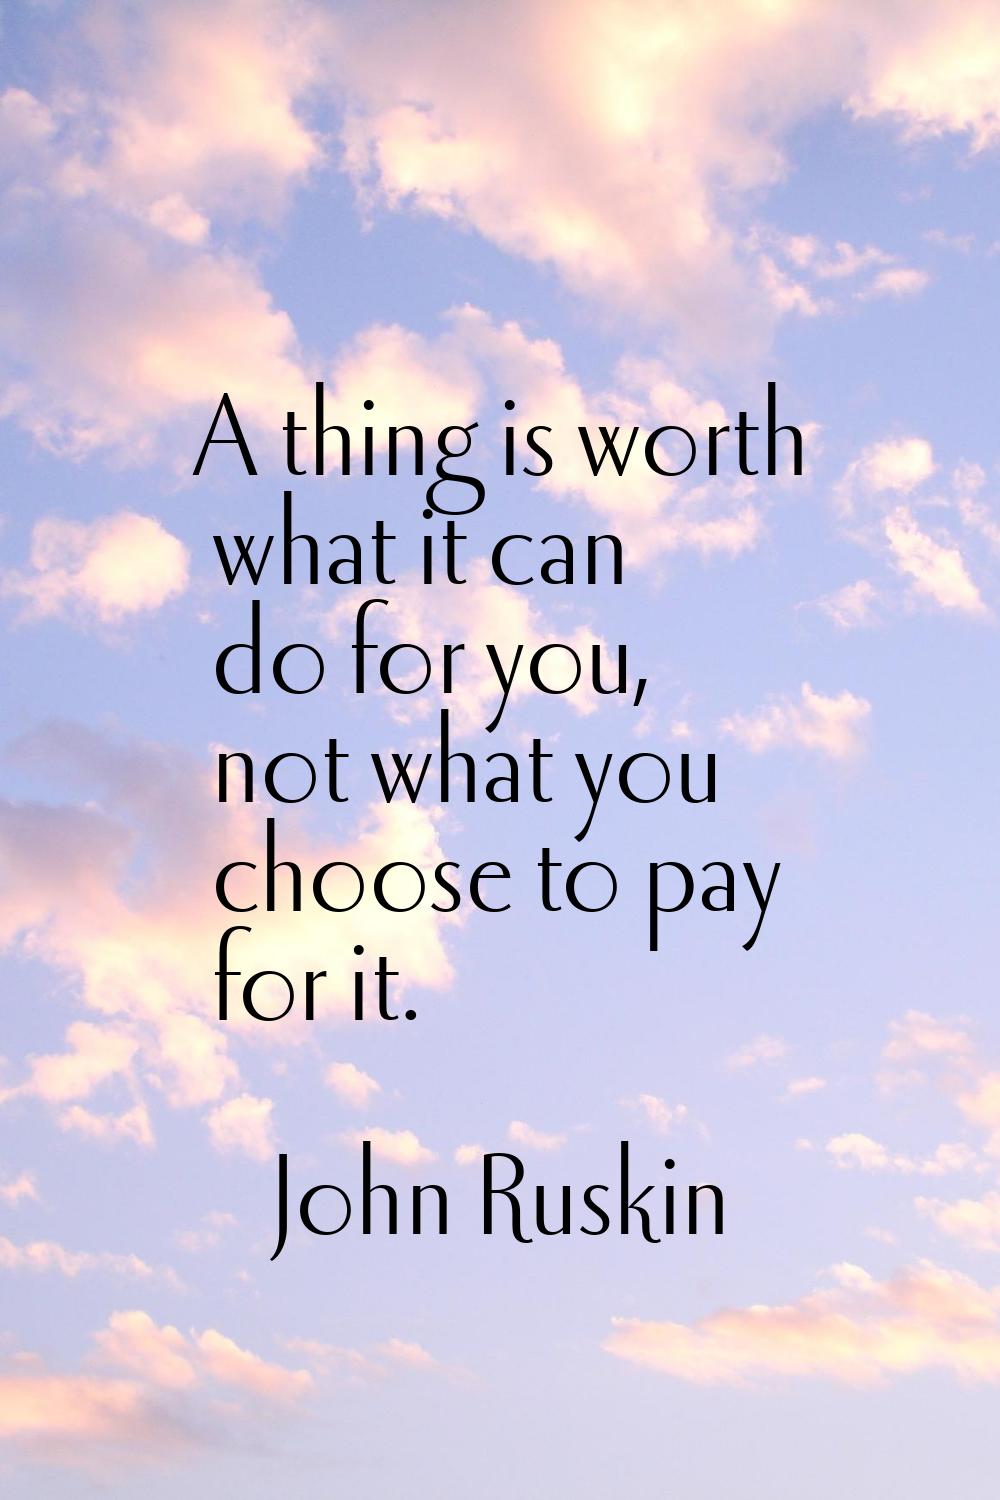 A thing is worth what it can do for you, not what you choose to pay for it.